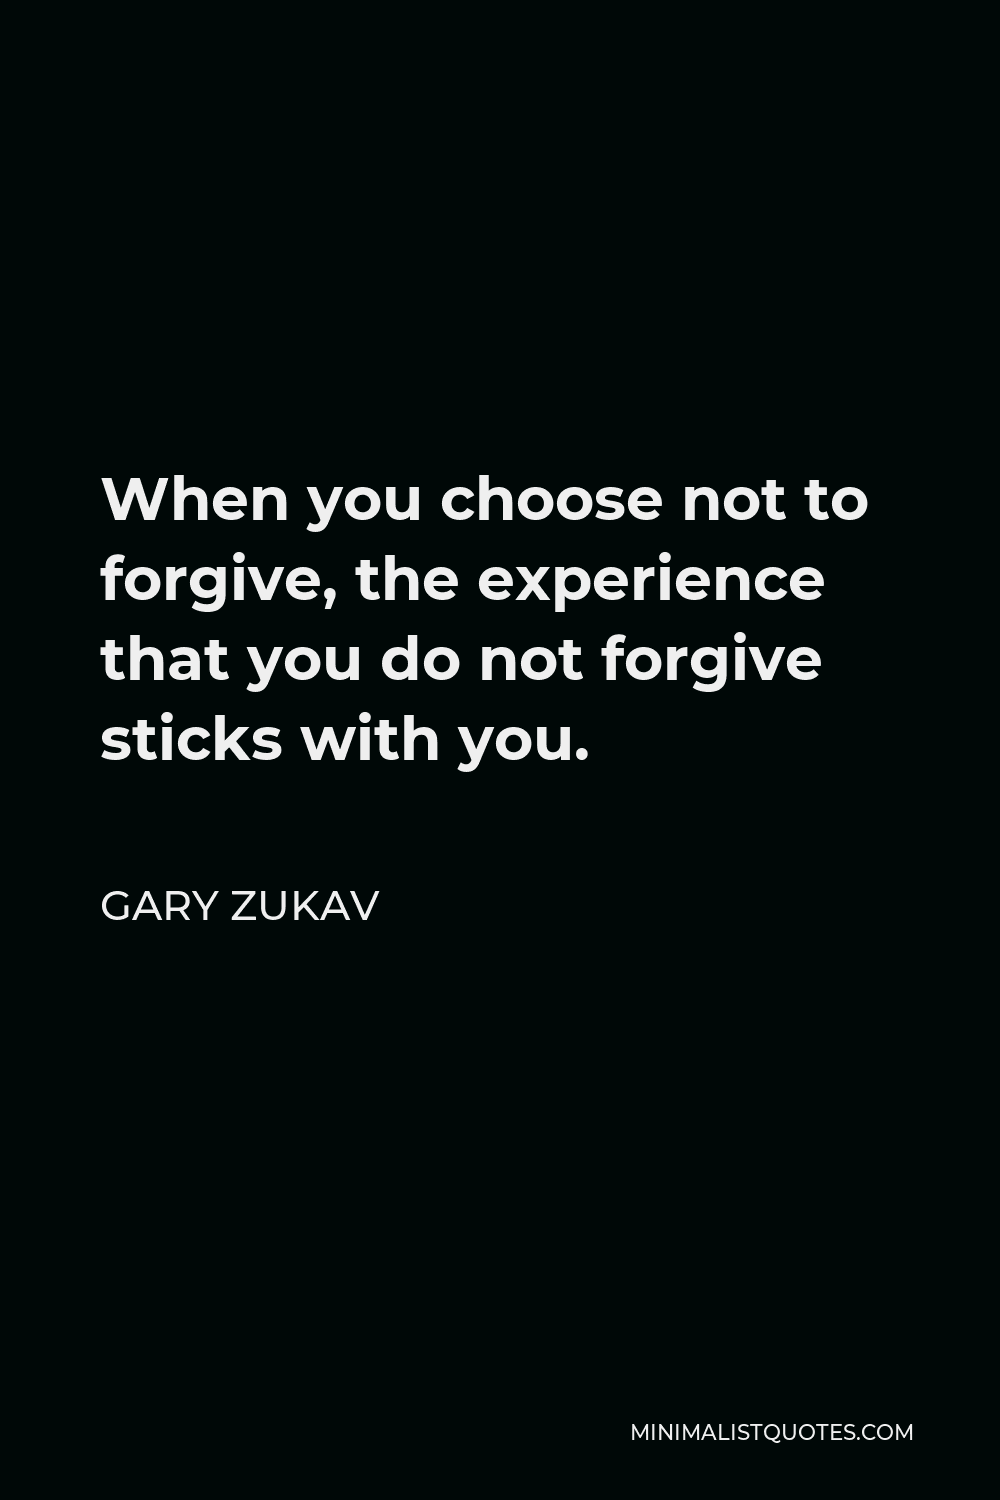 Gary Zukav Quote - When you choose not to forgive, the experience that you do not forgive sticks with you.